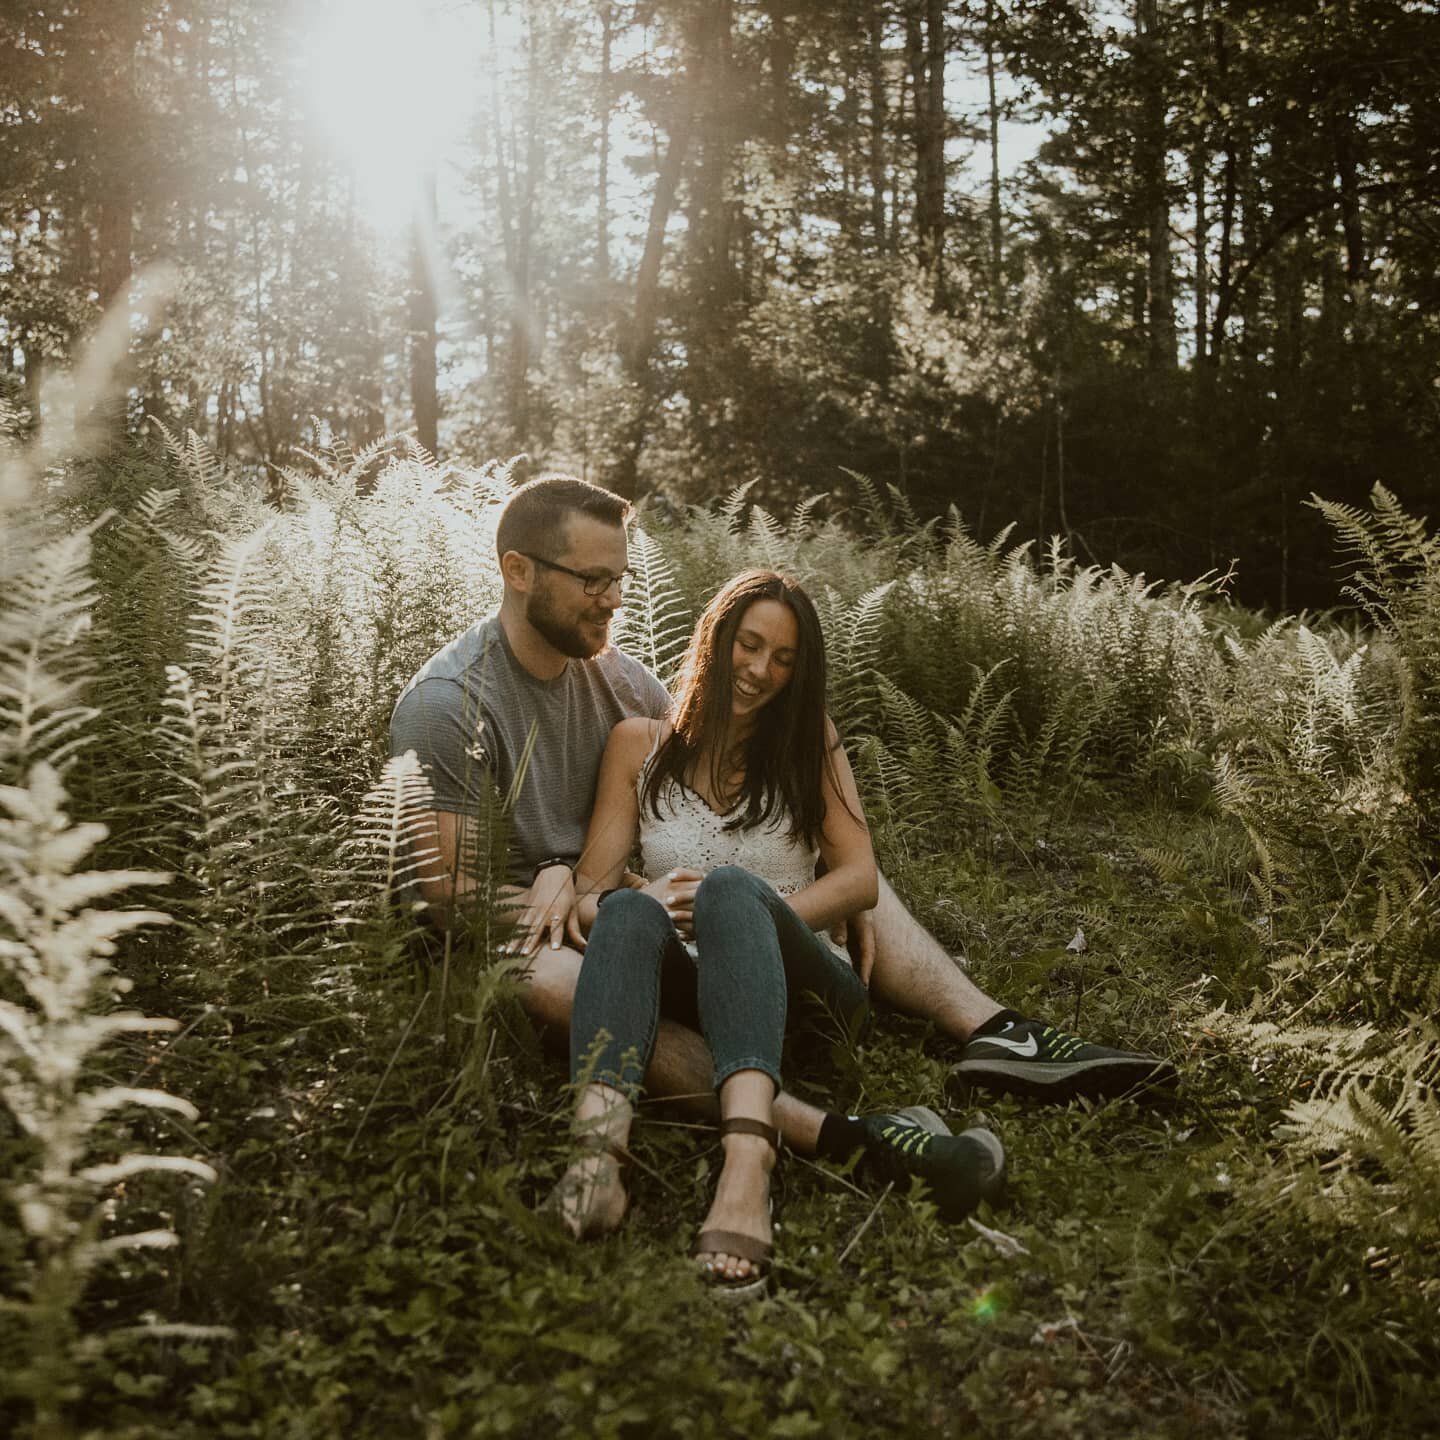 Started in the ferns and ended dancing in a field✨✨✨
.
.
.
#devolveimaging #engagement #devolveimagingphotography #ctengagement #ctengagementphotographer #engagementsession #engagement.photo.inspiration #woodsysession #rusticengagement #ctweddingphot